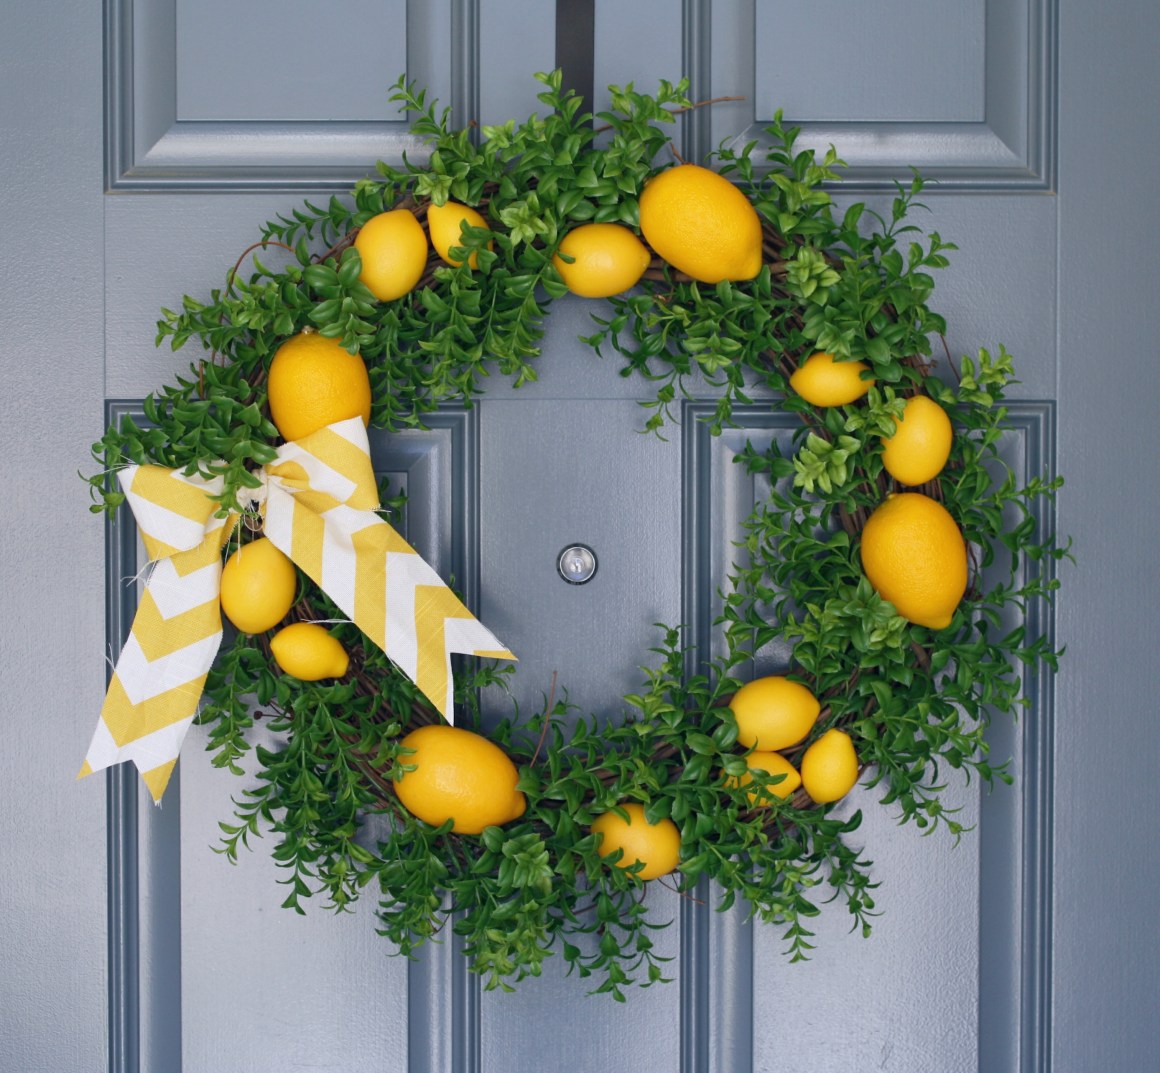 A green wreath with yellow lemons on it and a white and yellow bow, hanging on a slate blue door.